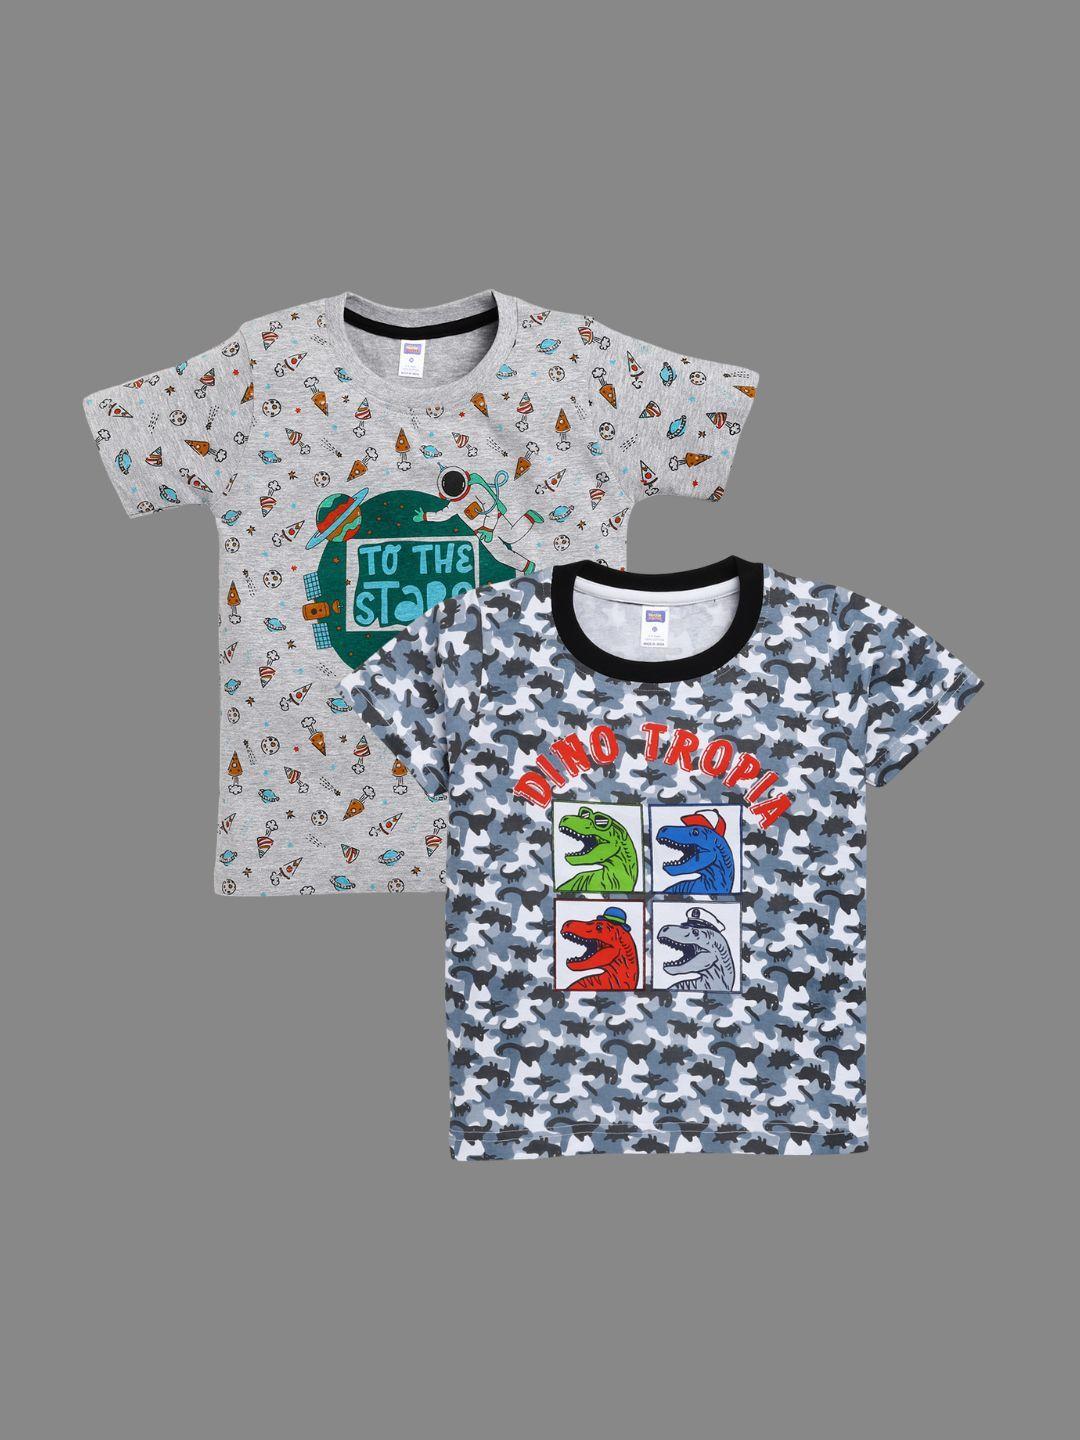 nottie planet boys pack of 2 pure cotton t-shirts